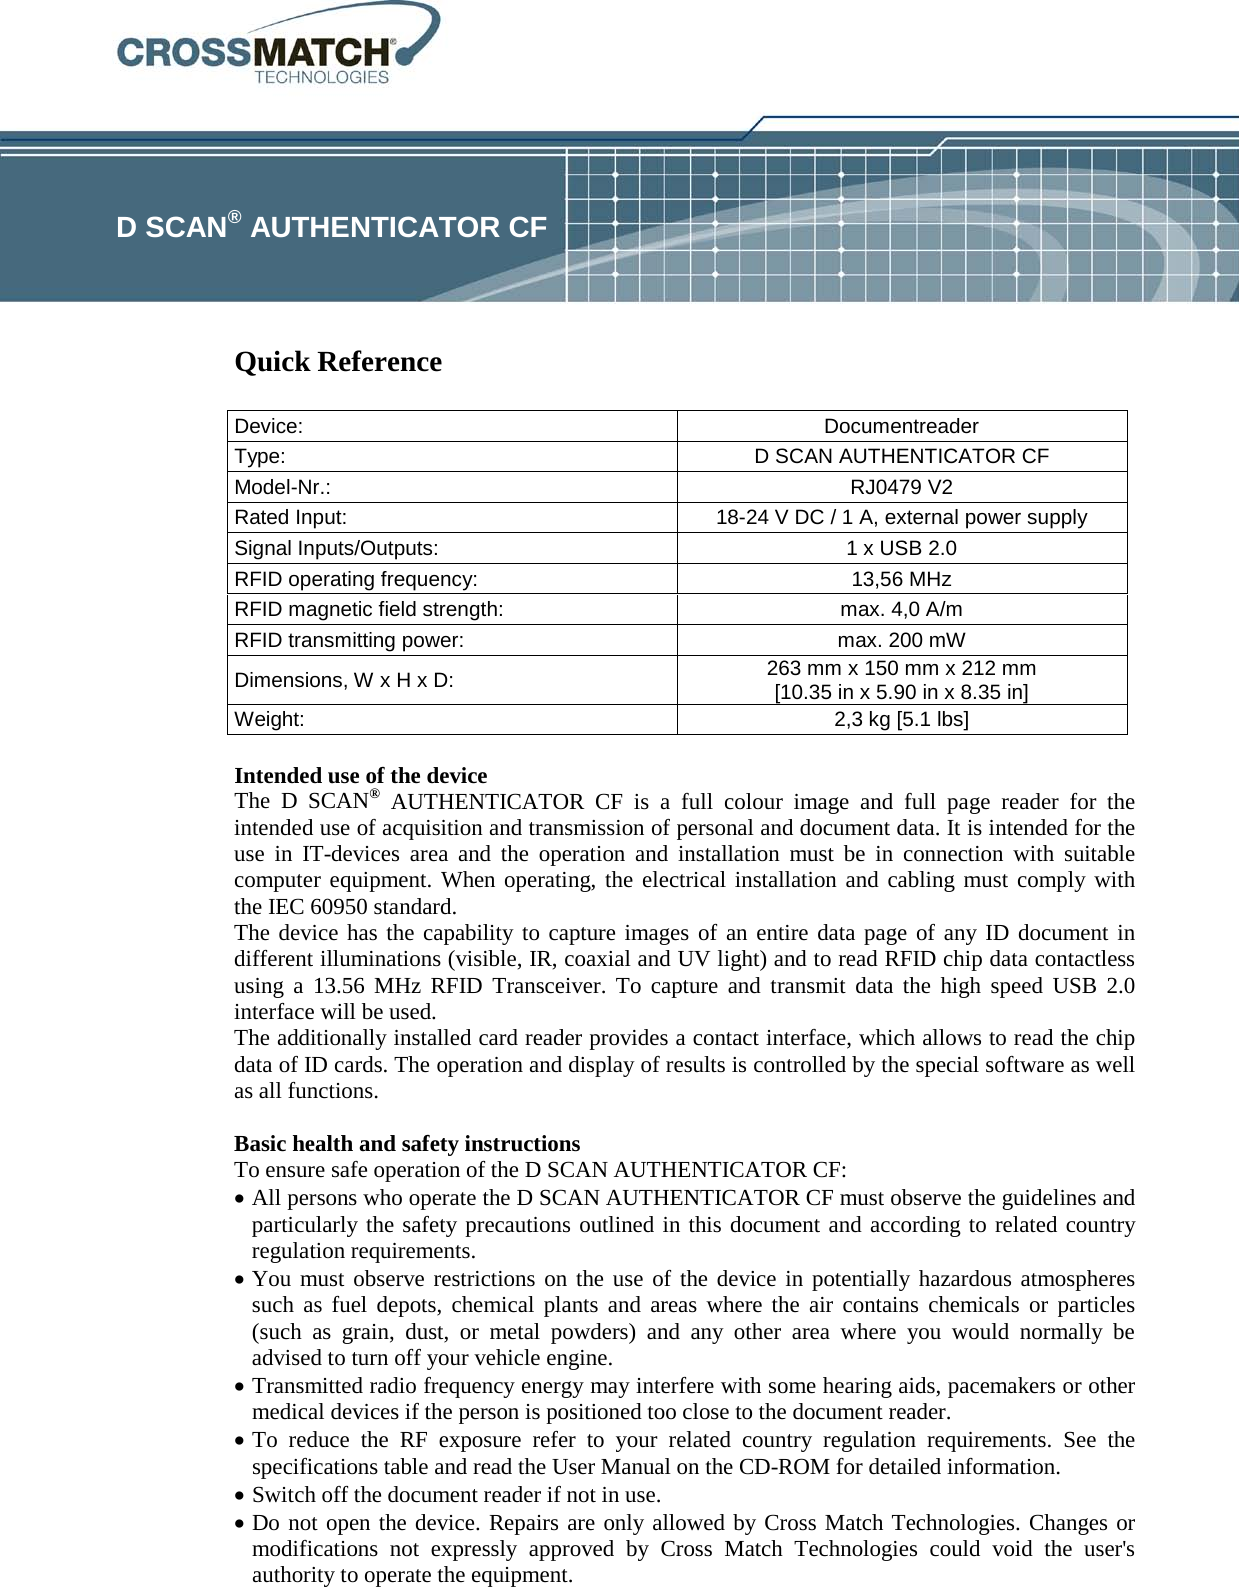             Quick Reference   Intended use of the device The D SCAN® AUTHENTICATOR CF is a full colour image and full page reader for the intended use of acquisition and transmission of personal and document data. It is intended for the use in IT-devices area and the operation and installation must be in connection with suitable computer equipment. When operating, the electrical installation and cabling must comply with the IEC 60950 standard. The device has the capability to capture images of an entire data page of any ID document in different illuminations (visible, IR, coaxial and UV light) and to read RFID chip data contactless using a 13.56 MHz RFID Transceiver. To capture and transmit data the high speed USB 2.0 interface will be used. The additionally installed card reader provides a contact interface, which allows to read the chip data of ID cards. The operation and display of results is controlled by the special software as well as all functions.  Basic health and safety instructions To ensure safe operation of the D SCAN AUTHENTICATOR CF:  • All persons who operate the D SCAN AUTHENTICATOR CF must observe the guidelines and particularly the safety precautions outlined in this document and according to related country regulation requirements. • You must observe restrictions on the use of the device in potentially hazardous atmospheres such as fuel depots, chemical plants and areas where the air contains chemicals or particles (such as grain, dust, or metal powders) and any other area where you would normally be advised to turn off your vehicle engine. • Transmitted radio frequency energy may interfere with some hearing aids, pacemakers or other medical devices if the person is positioned too close to the document reader. • To reduce the RF exposure refer to your related country regulation requirements.  See the specifications table and read the User Manual on the CD-ROM for detailed information. • Switch off the document reader if not in use. • Do not open the device. Repairs are only allowed by Cross Match Technologies. Changes or modifications not expressly approved by Cross Match Technologies could void the user&apos;s authority to operate the equipment.  D SCAN® AUTHENTICATOR CF Device:  Documentreader Type: D SCAN AUTHENTICATOR CF Model-Nr.: RJ0479 V2 Rated Input: 18-24 V DC / 1 A, external power supply Signal Inputs/Outputs: 1 x USB 2.0 RFID operating frequency: 13,56 MHz RFID magnetic field strength: max. 4,0 A/m RFID transmitting power: max. 200 mW Dimensions, W x H x D: 263 mm x 150 mm x 212 mm [10.35 in x 5.90 in x 8.35 in] Weight: 2,3 kg [5.1 lbs] 